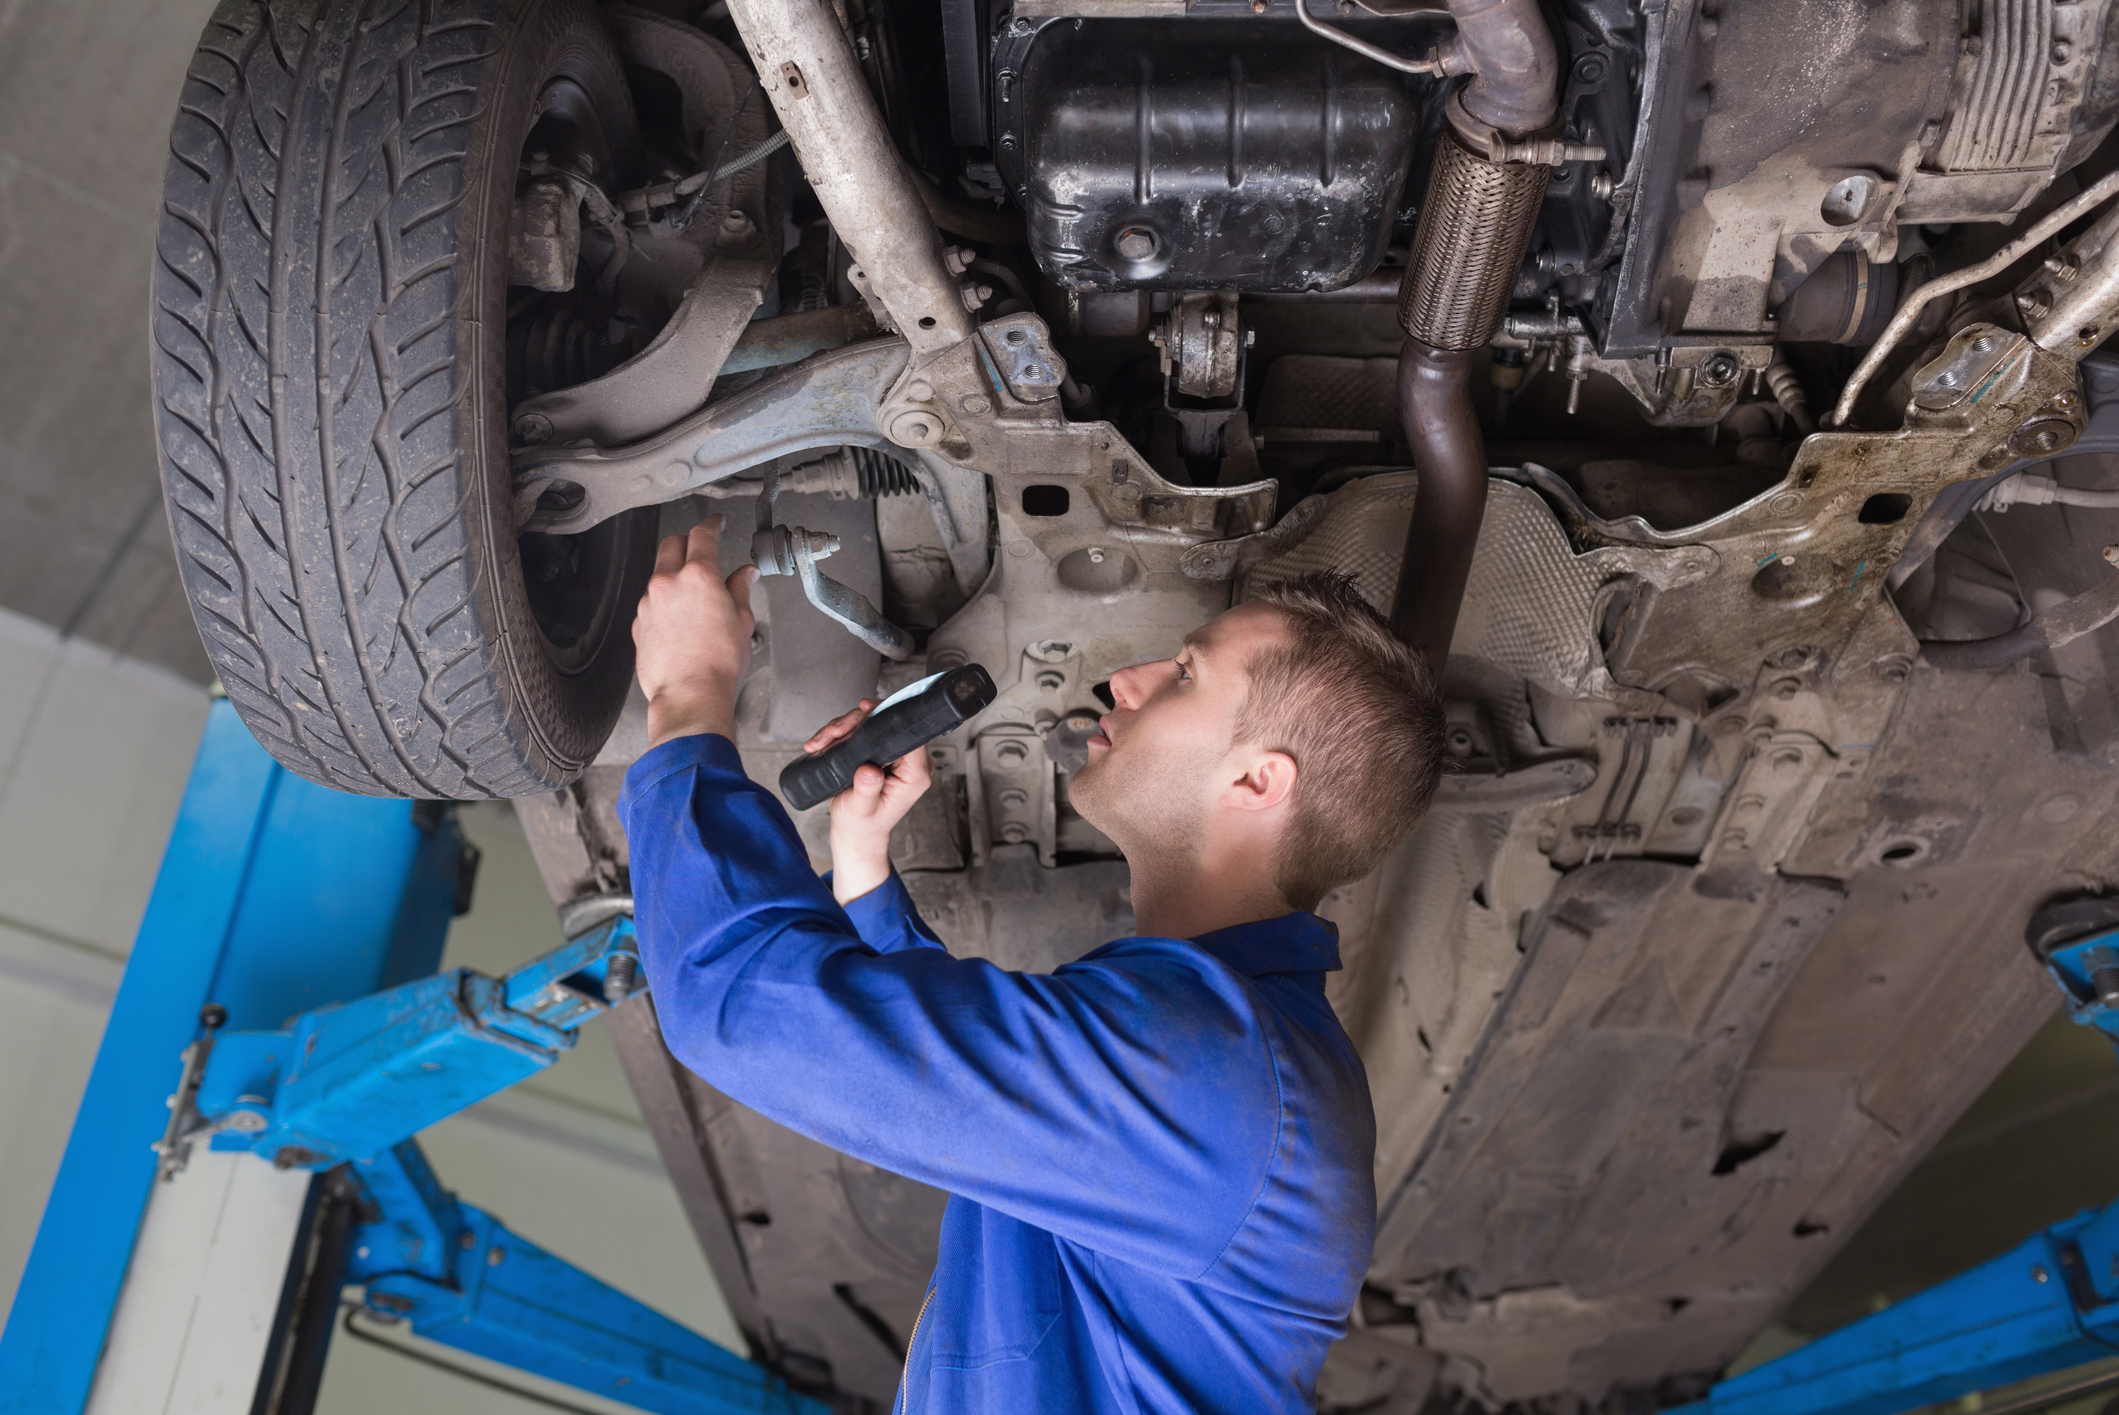 New autobody structural repair technician needed at Lake Pend Oreille autobody shop